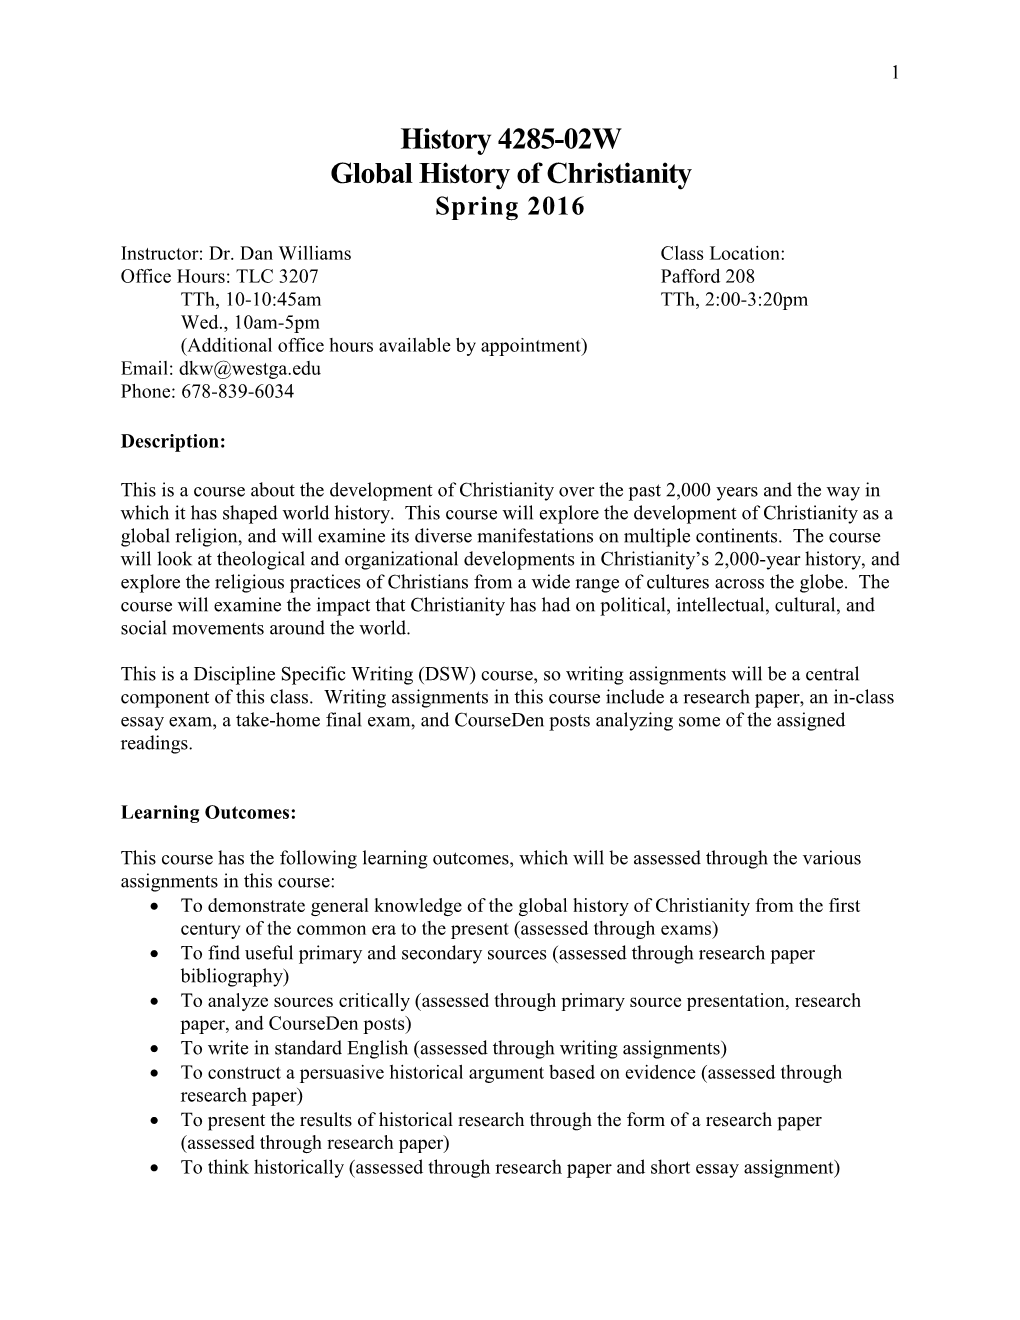 History 4285-02W Global History of Christianity Spring 2016